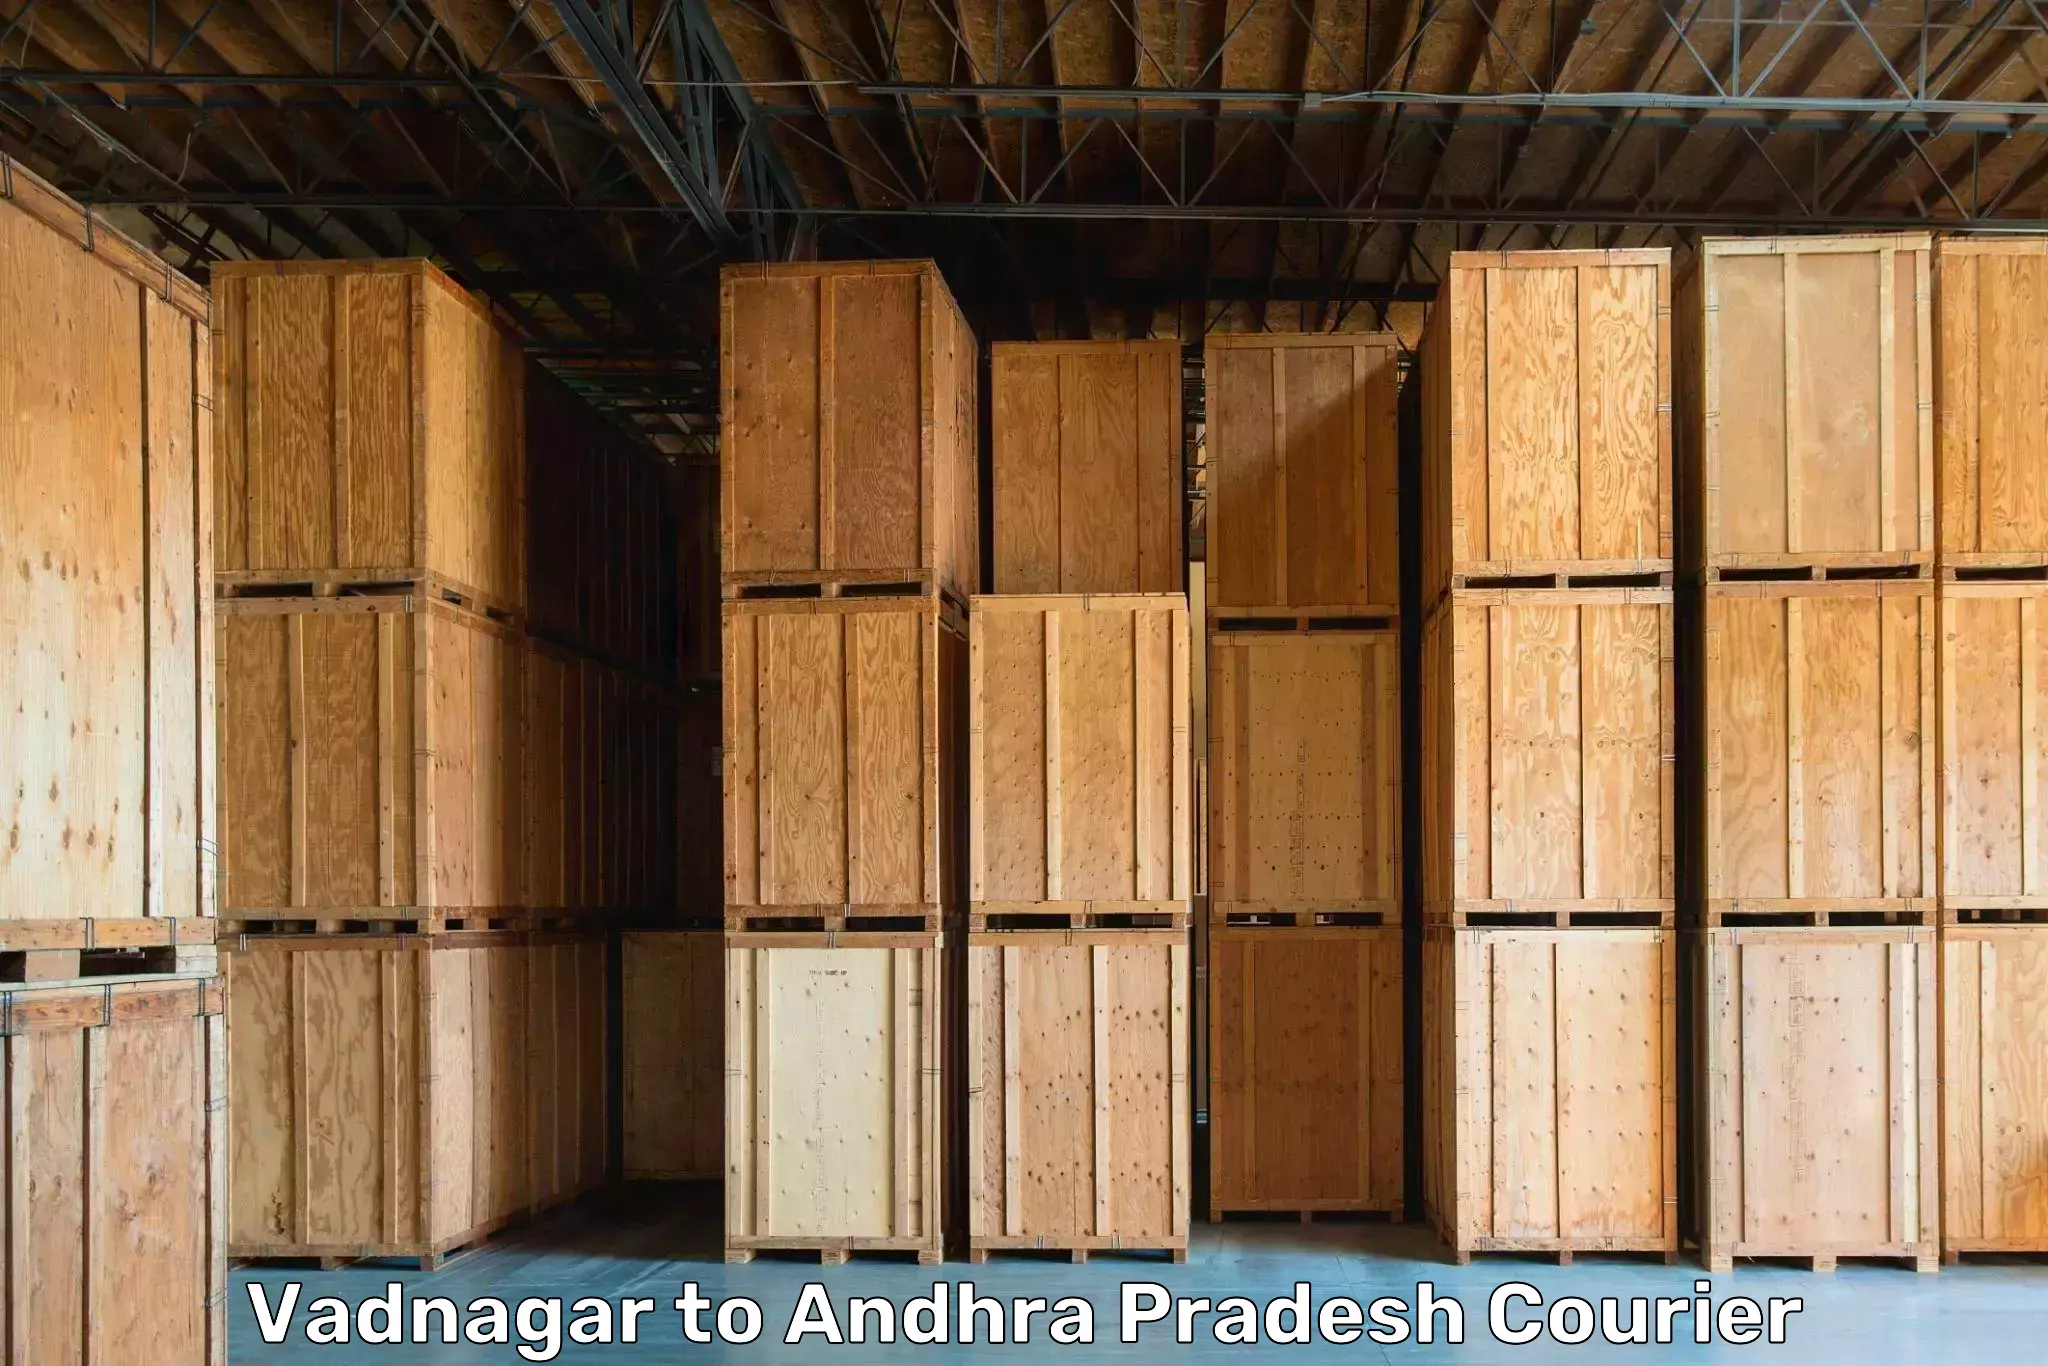 Quality moving and storage in Vadnagar to Madanapalle